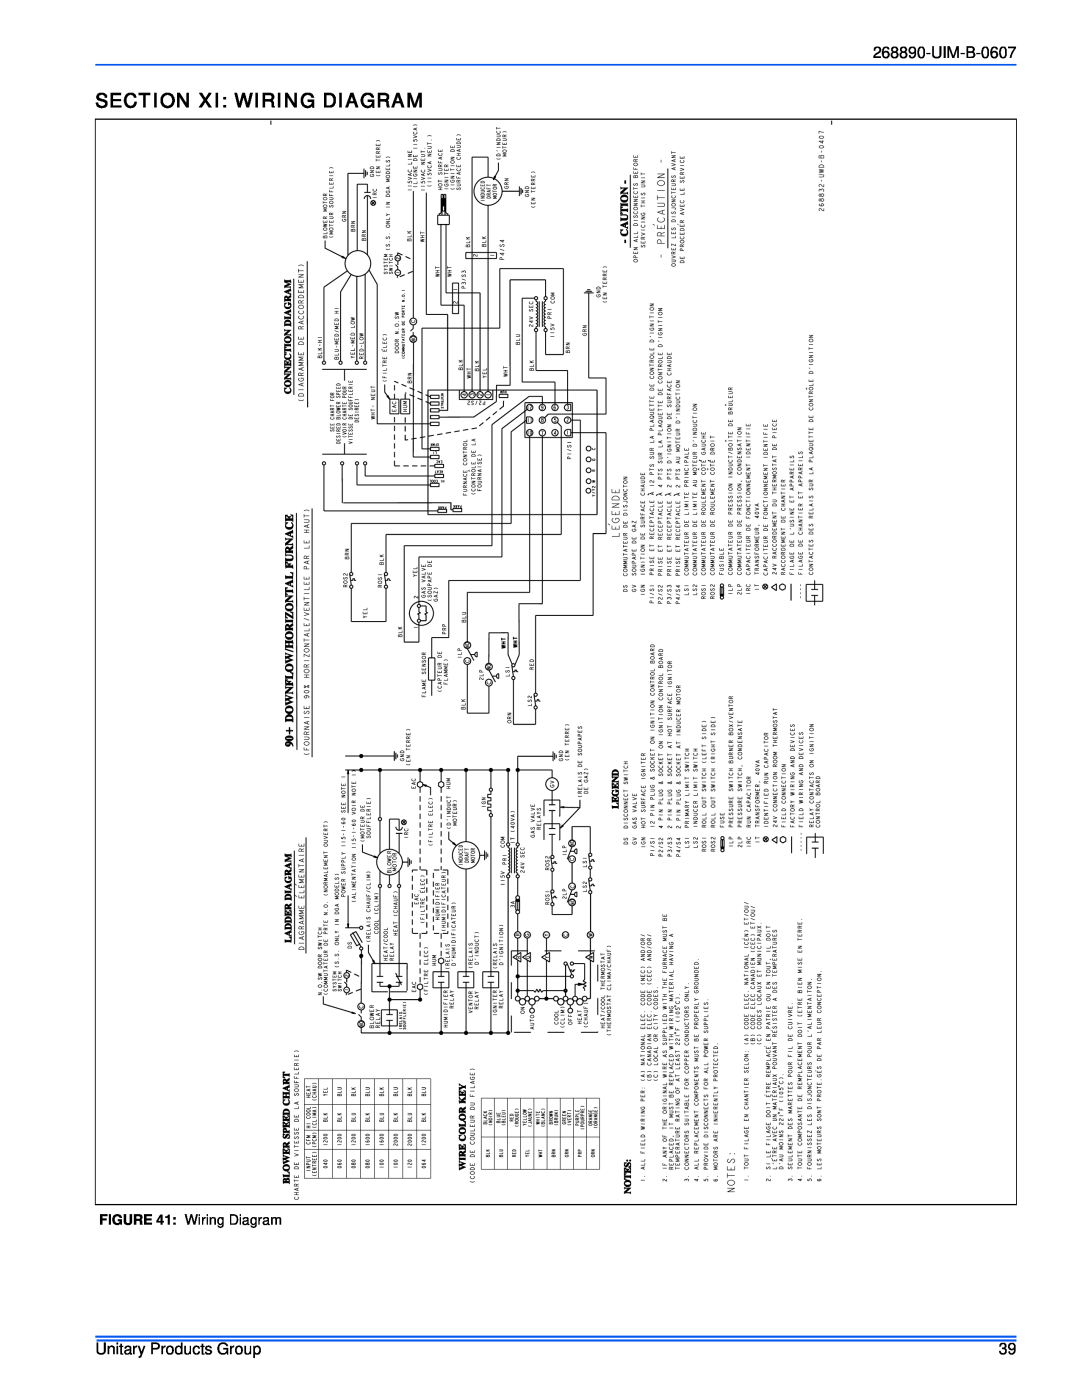 York GM9S*DH, GY9S*DH, GF9S*DH installation manual Section Xi Wiring Diagram, UIM-B-0607, Unitary Products Group 